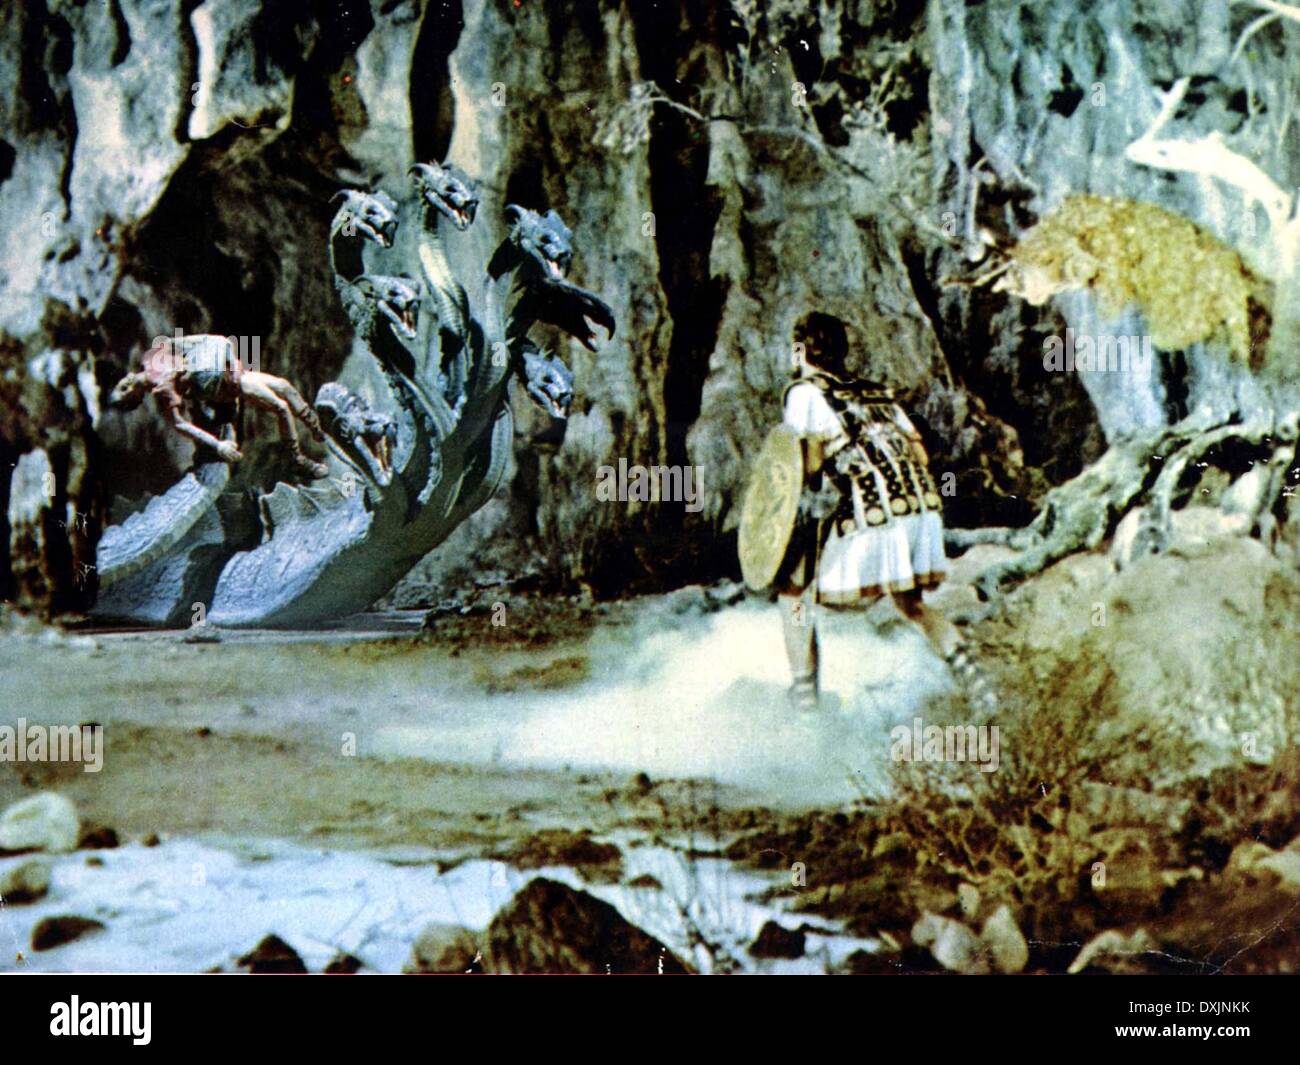 JASON AND THE ARGONAUTS (BR/US 1963) COLUMBIA PICTURES TODD Stock Photo